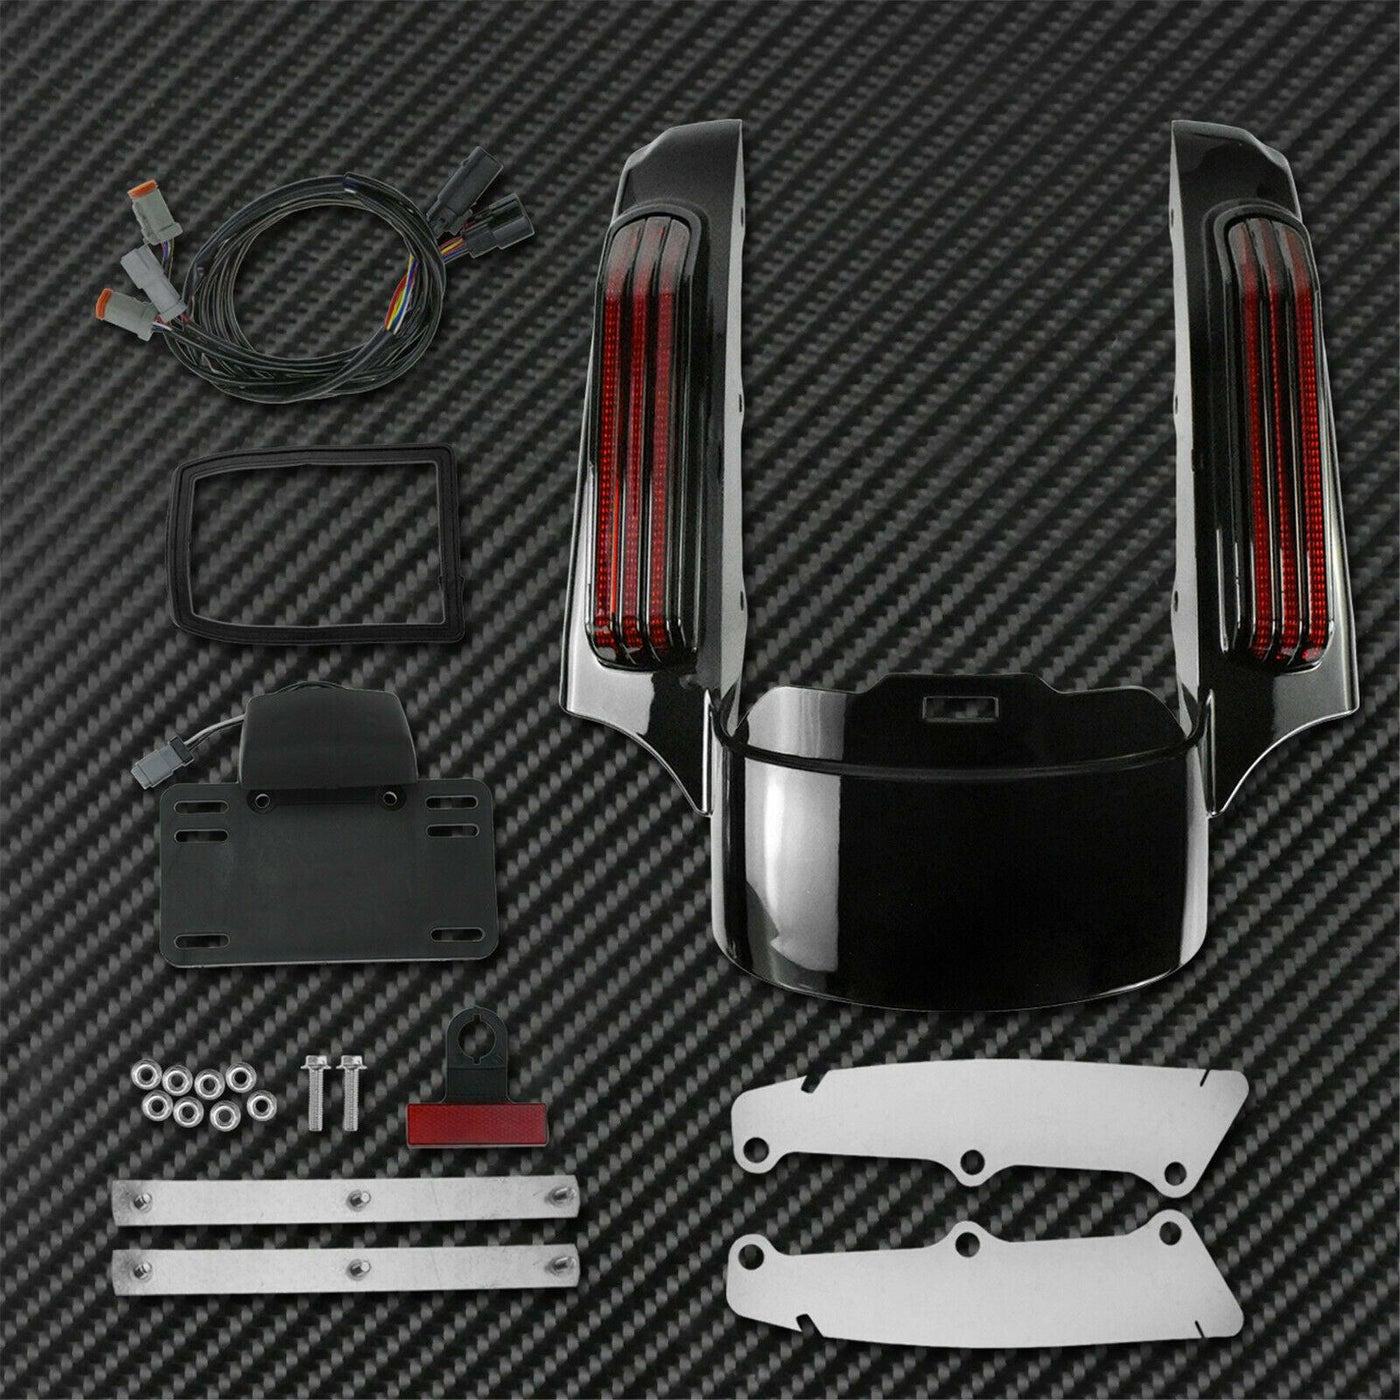 Rear Fender Extension LED Light+Saddlebag Tail Light Fit For Touring 2014-up - Moto Life Products